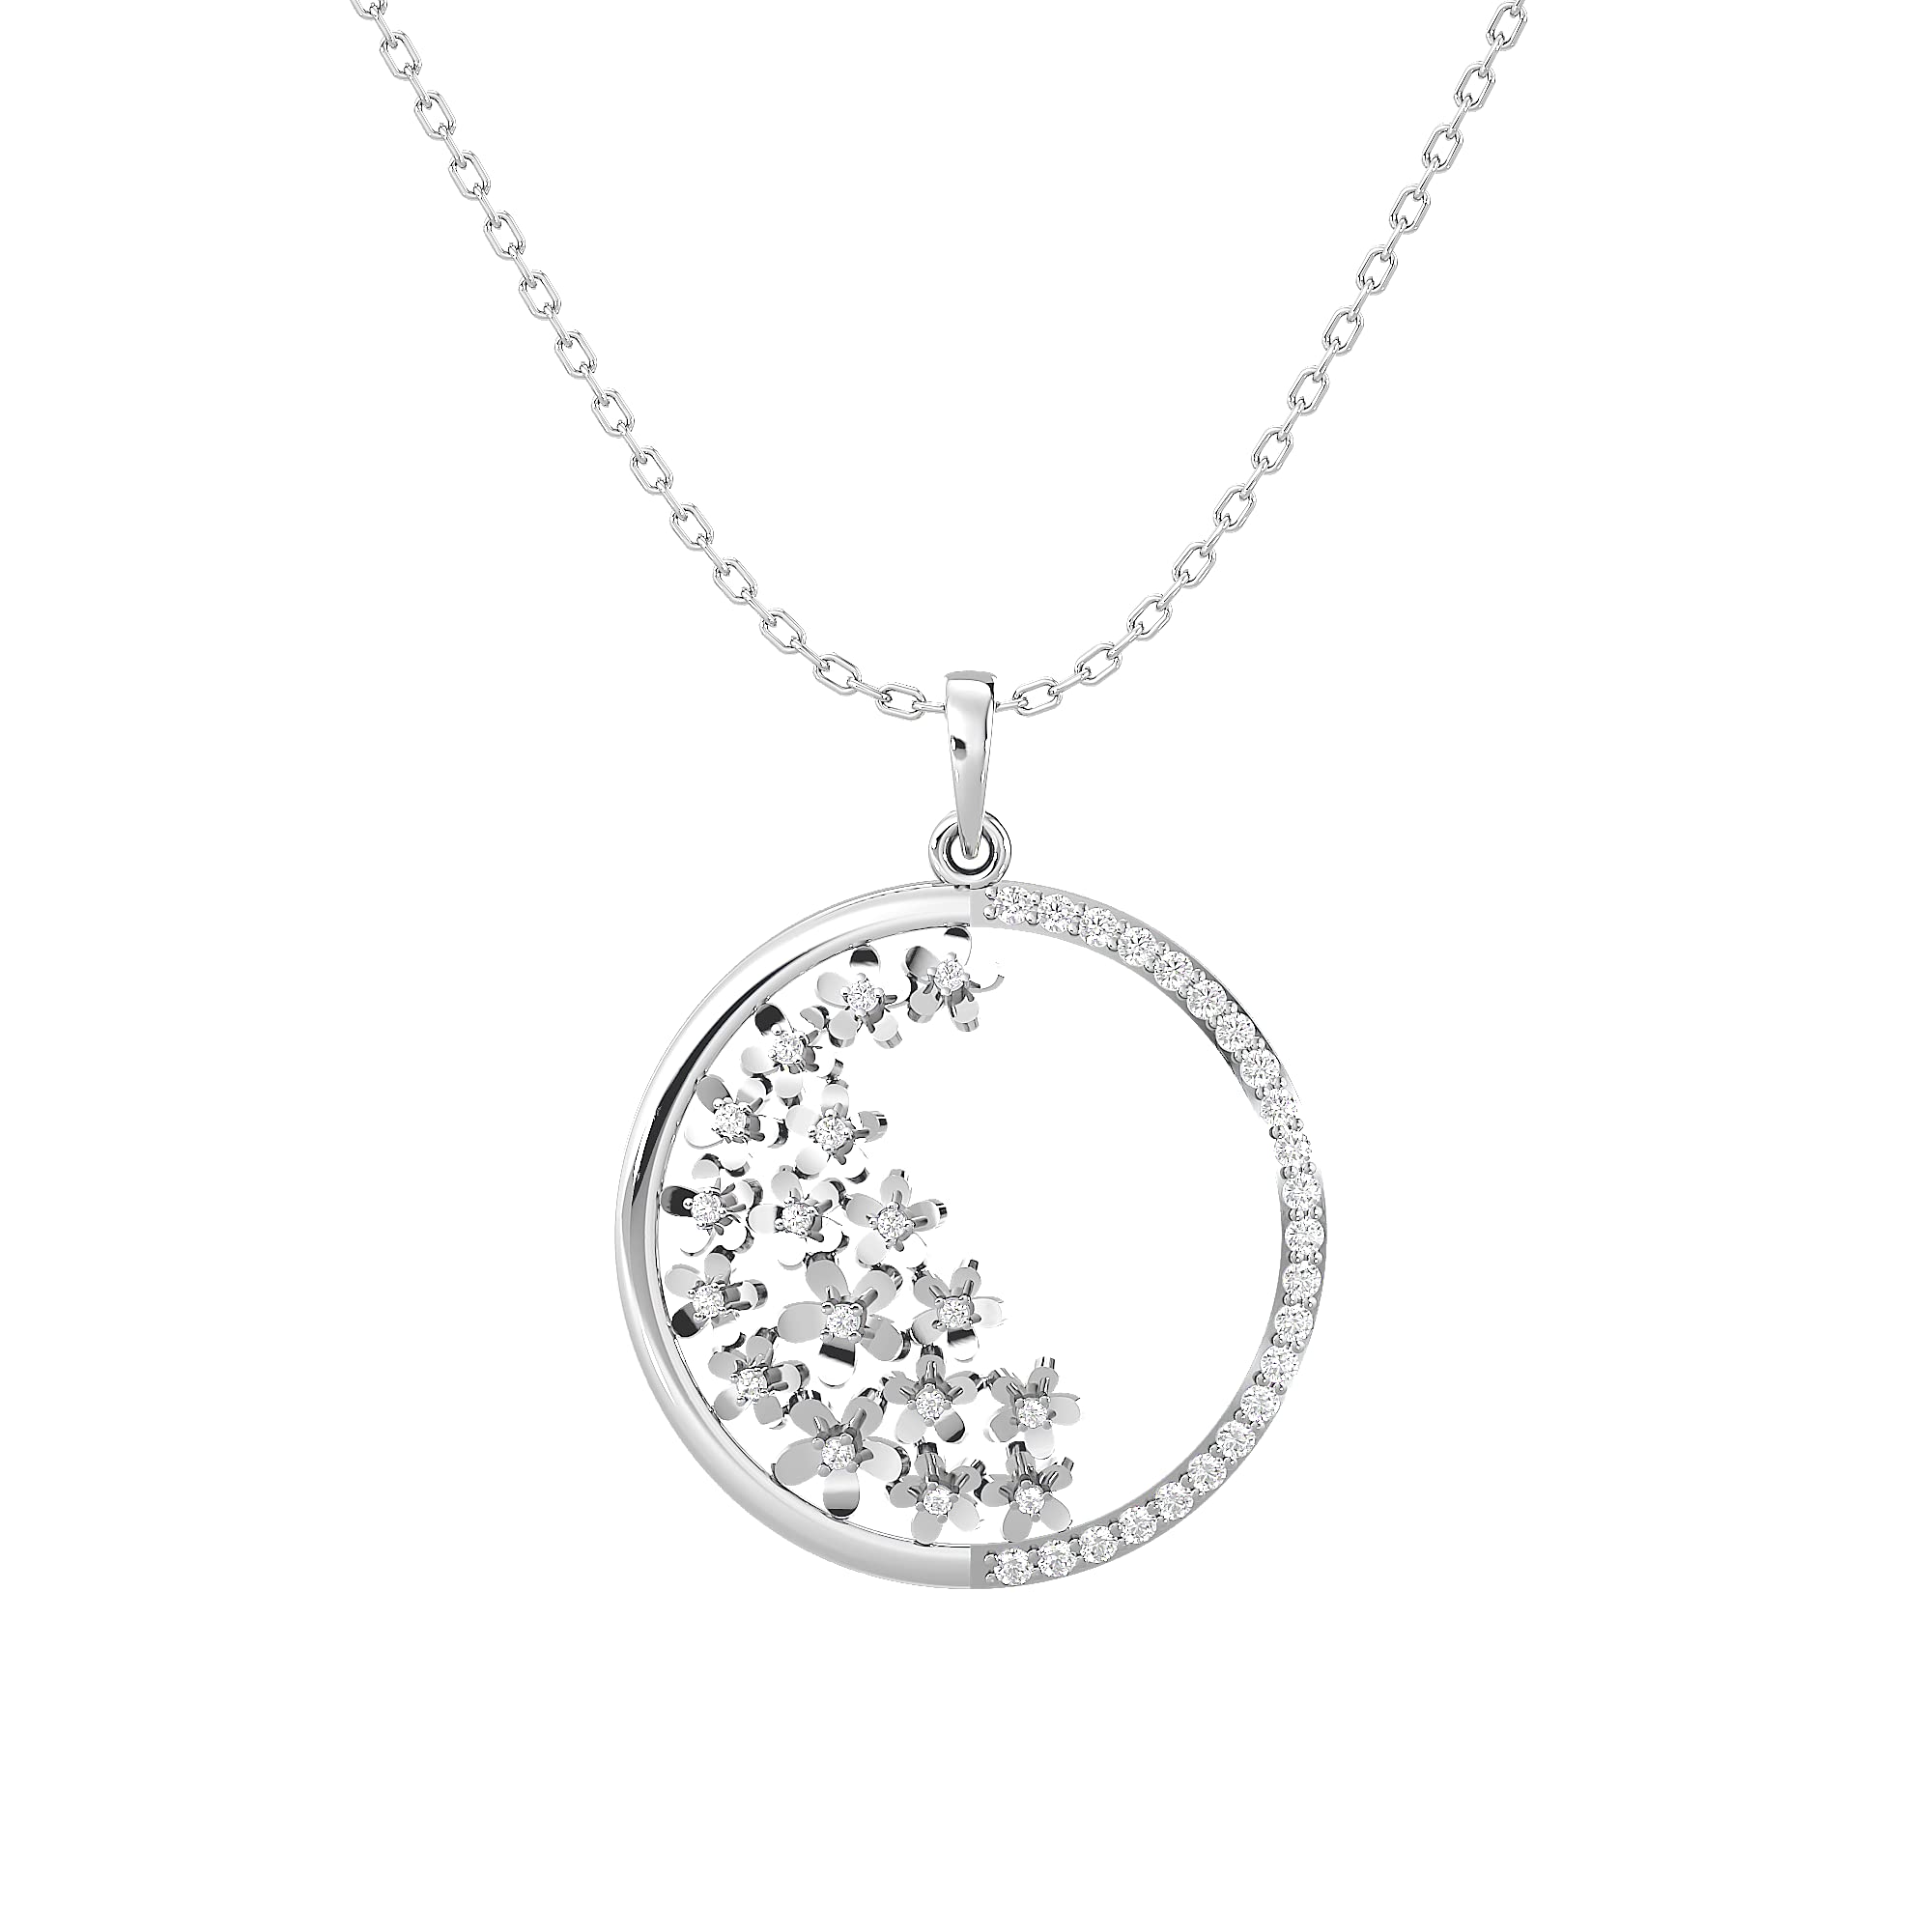 Certified 18K Gold Flowers Pendant in Round Natural Diamond (0.35 ct) with White/Yellow/Rose Gold Chain Stylish Necklace for Women